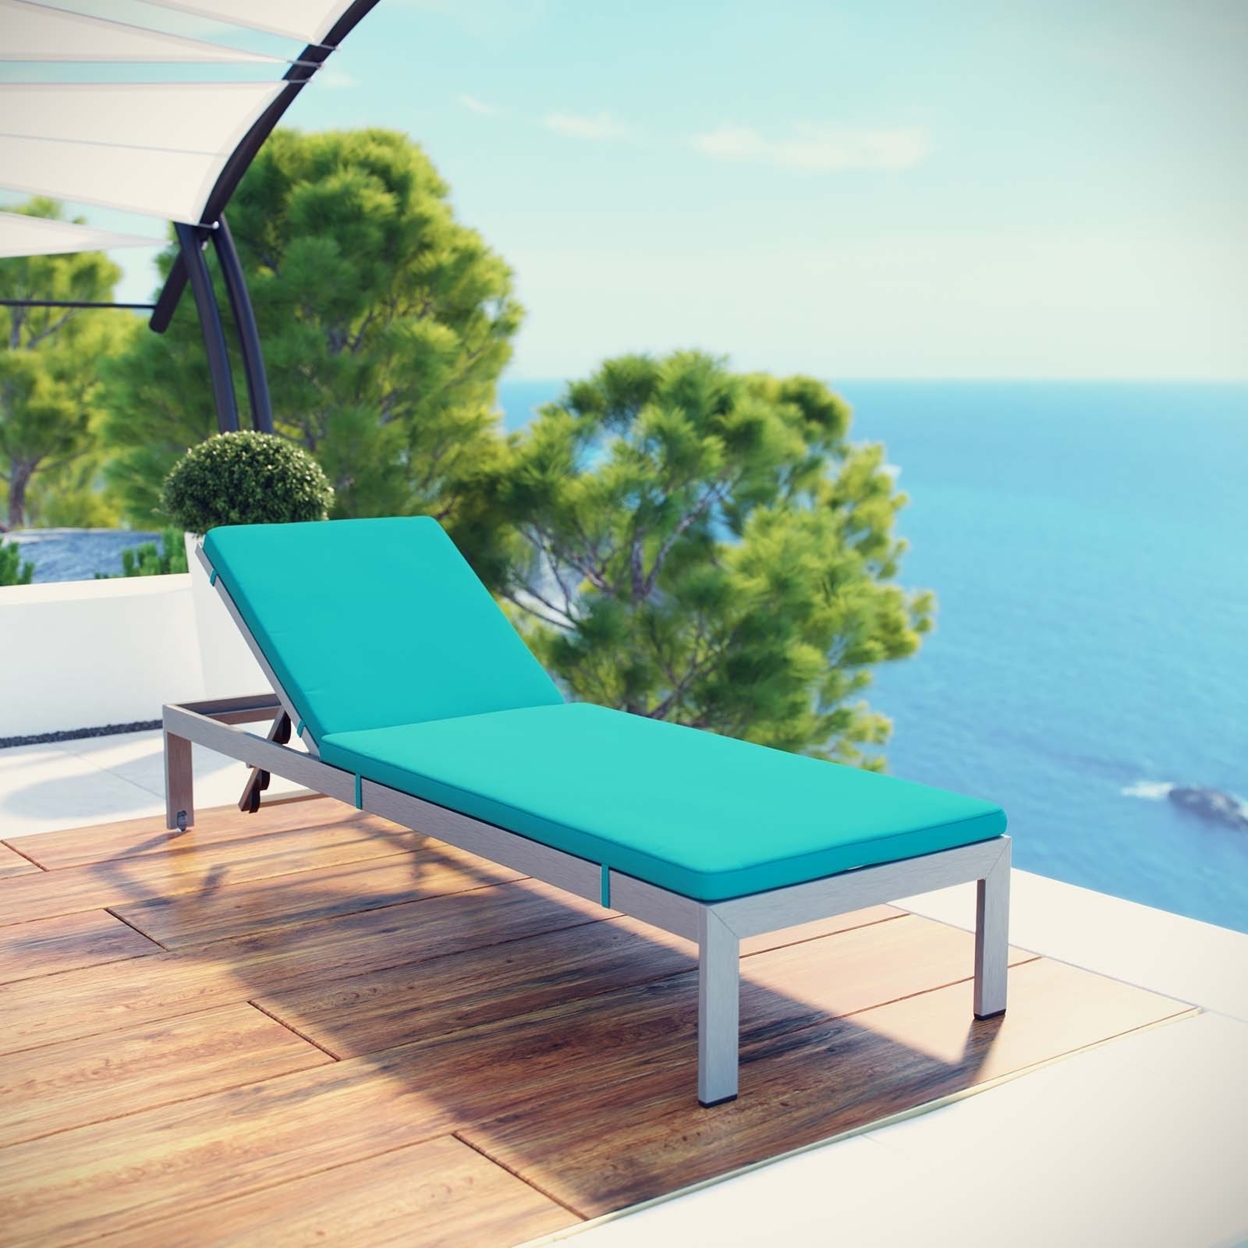 Shore Outdoor Patio Aluminum Chaise with Cushions Silver Turquoise - image 5 of 5